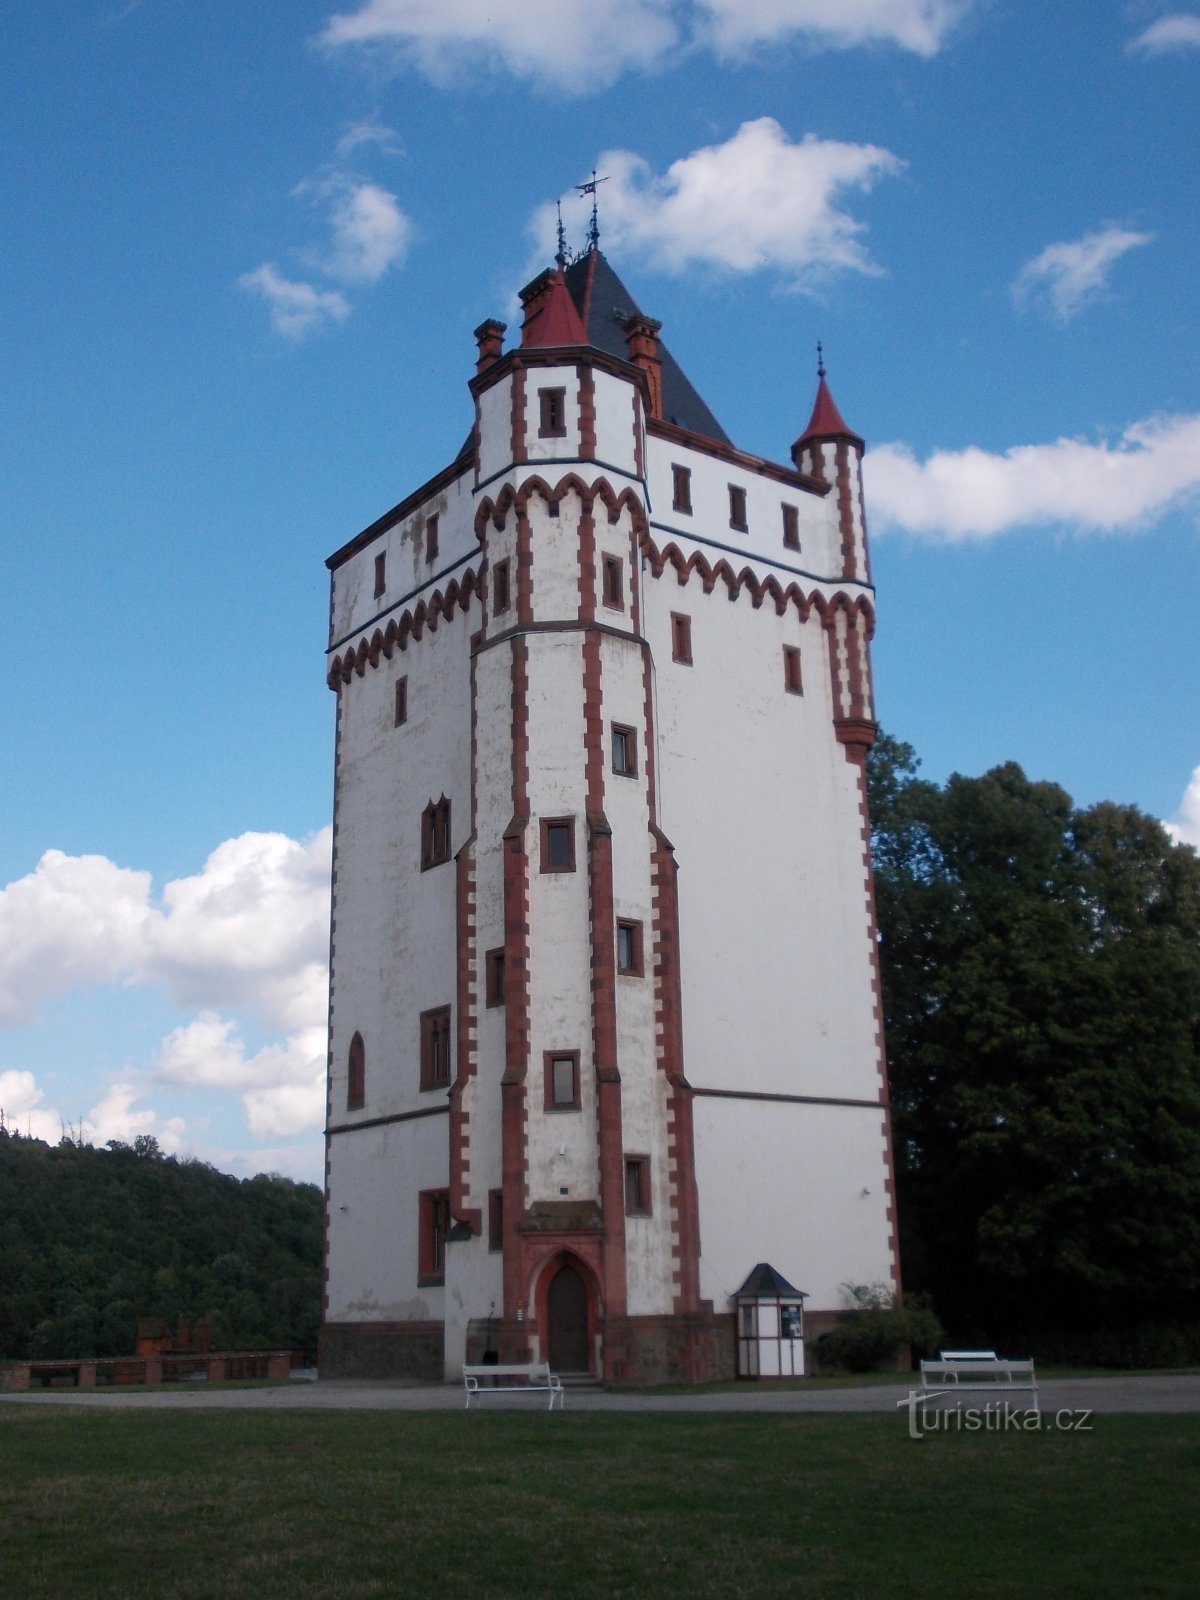 tower at the beginning of the castle park